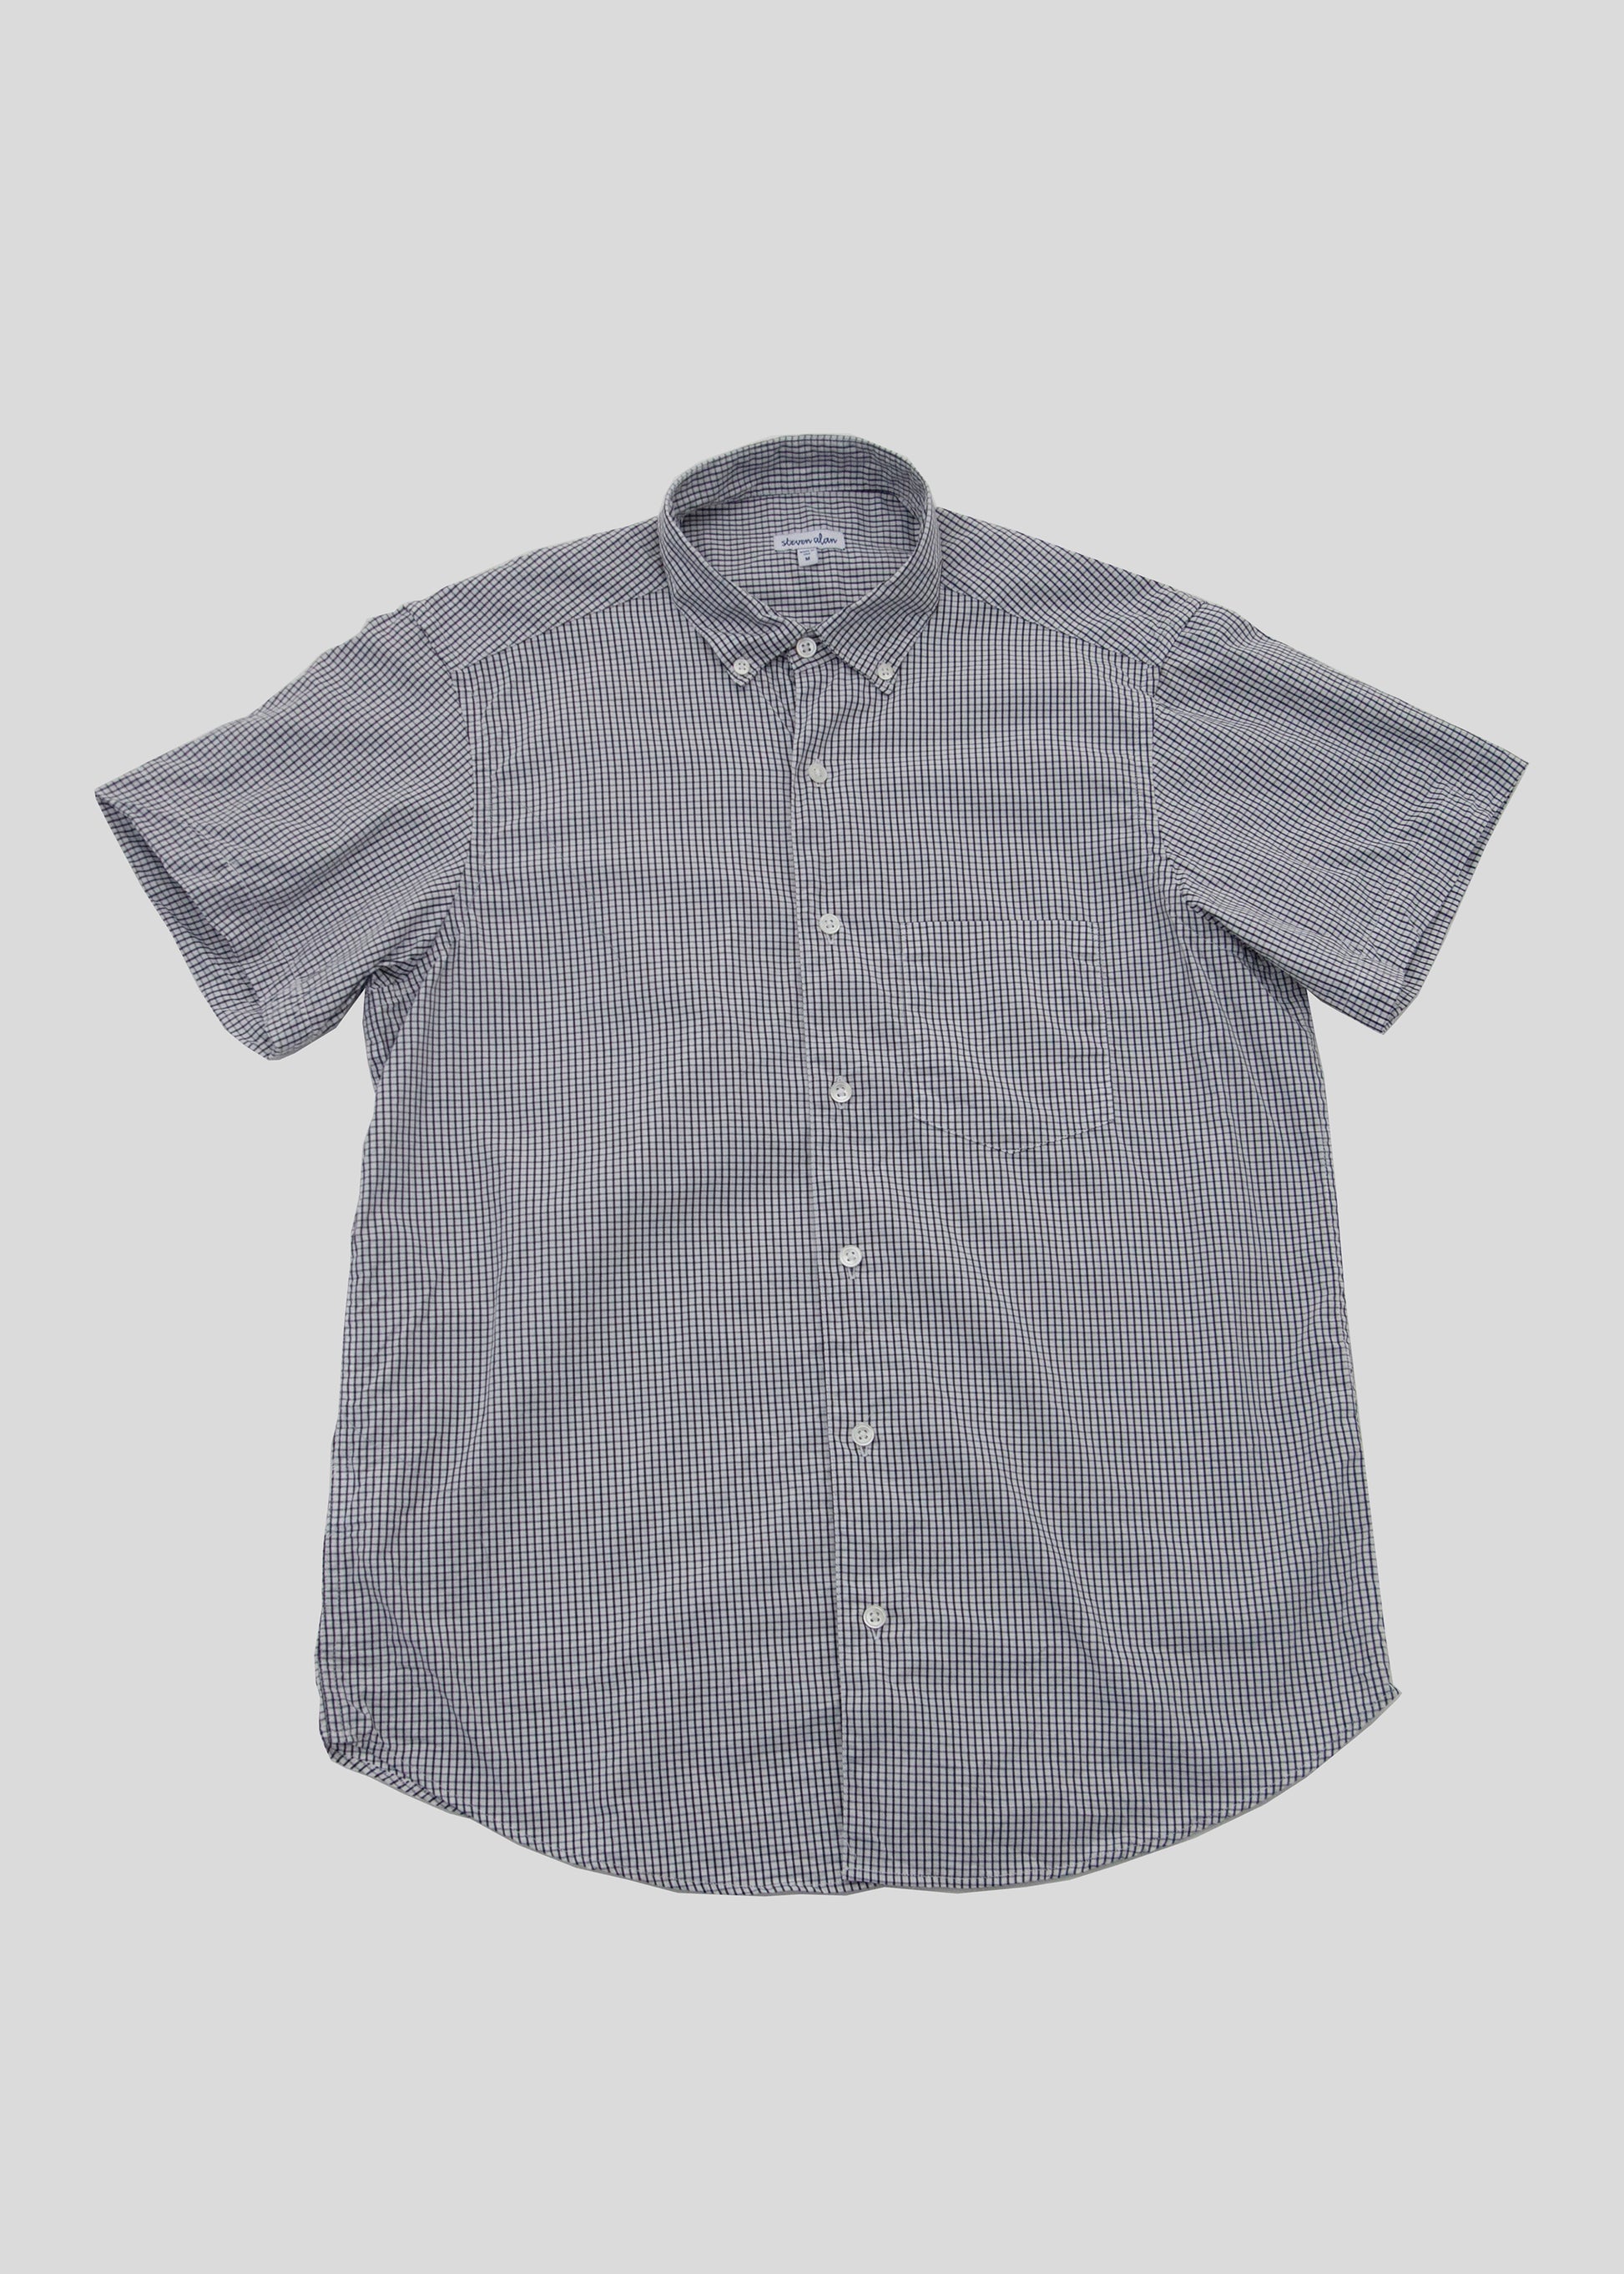 Front flat lay of short sleeve single needle shirt in color gingham black and white